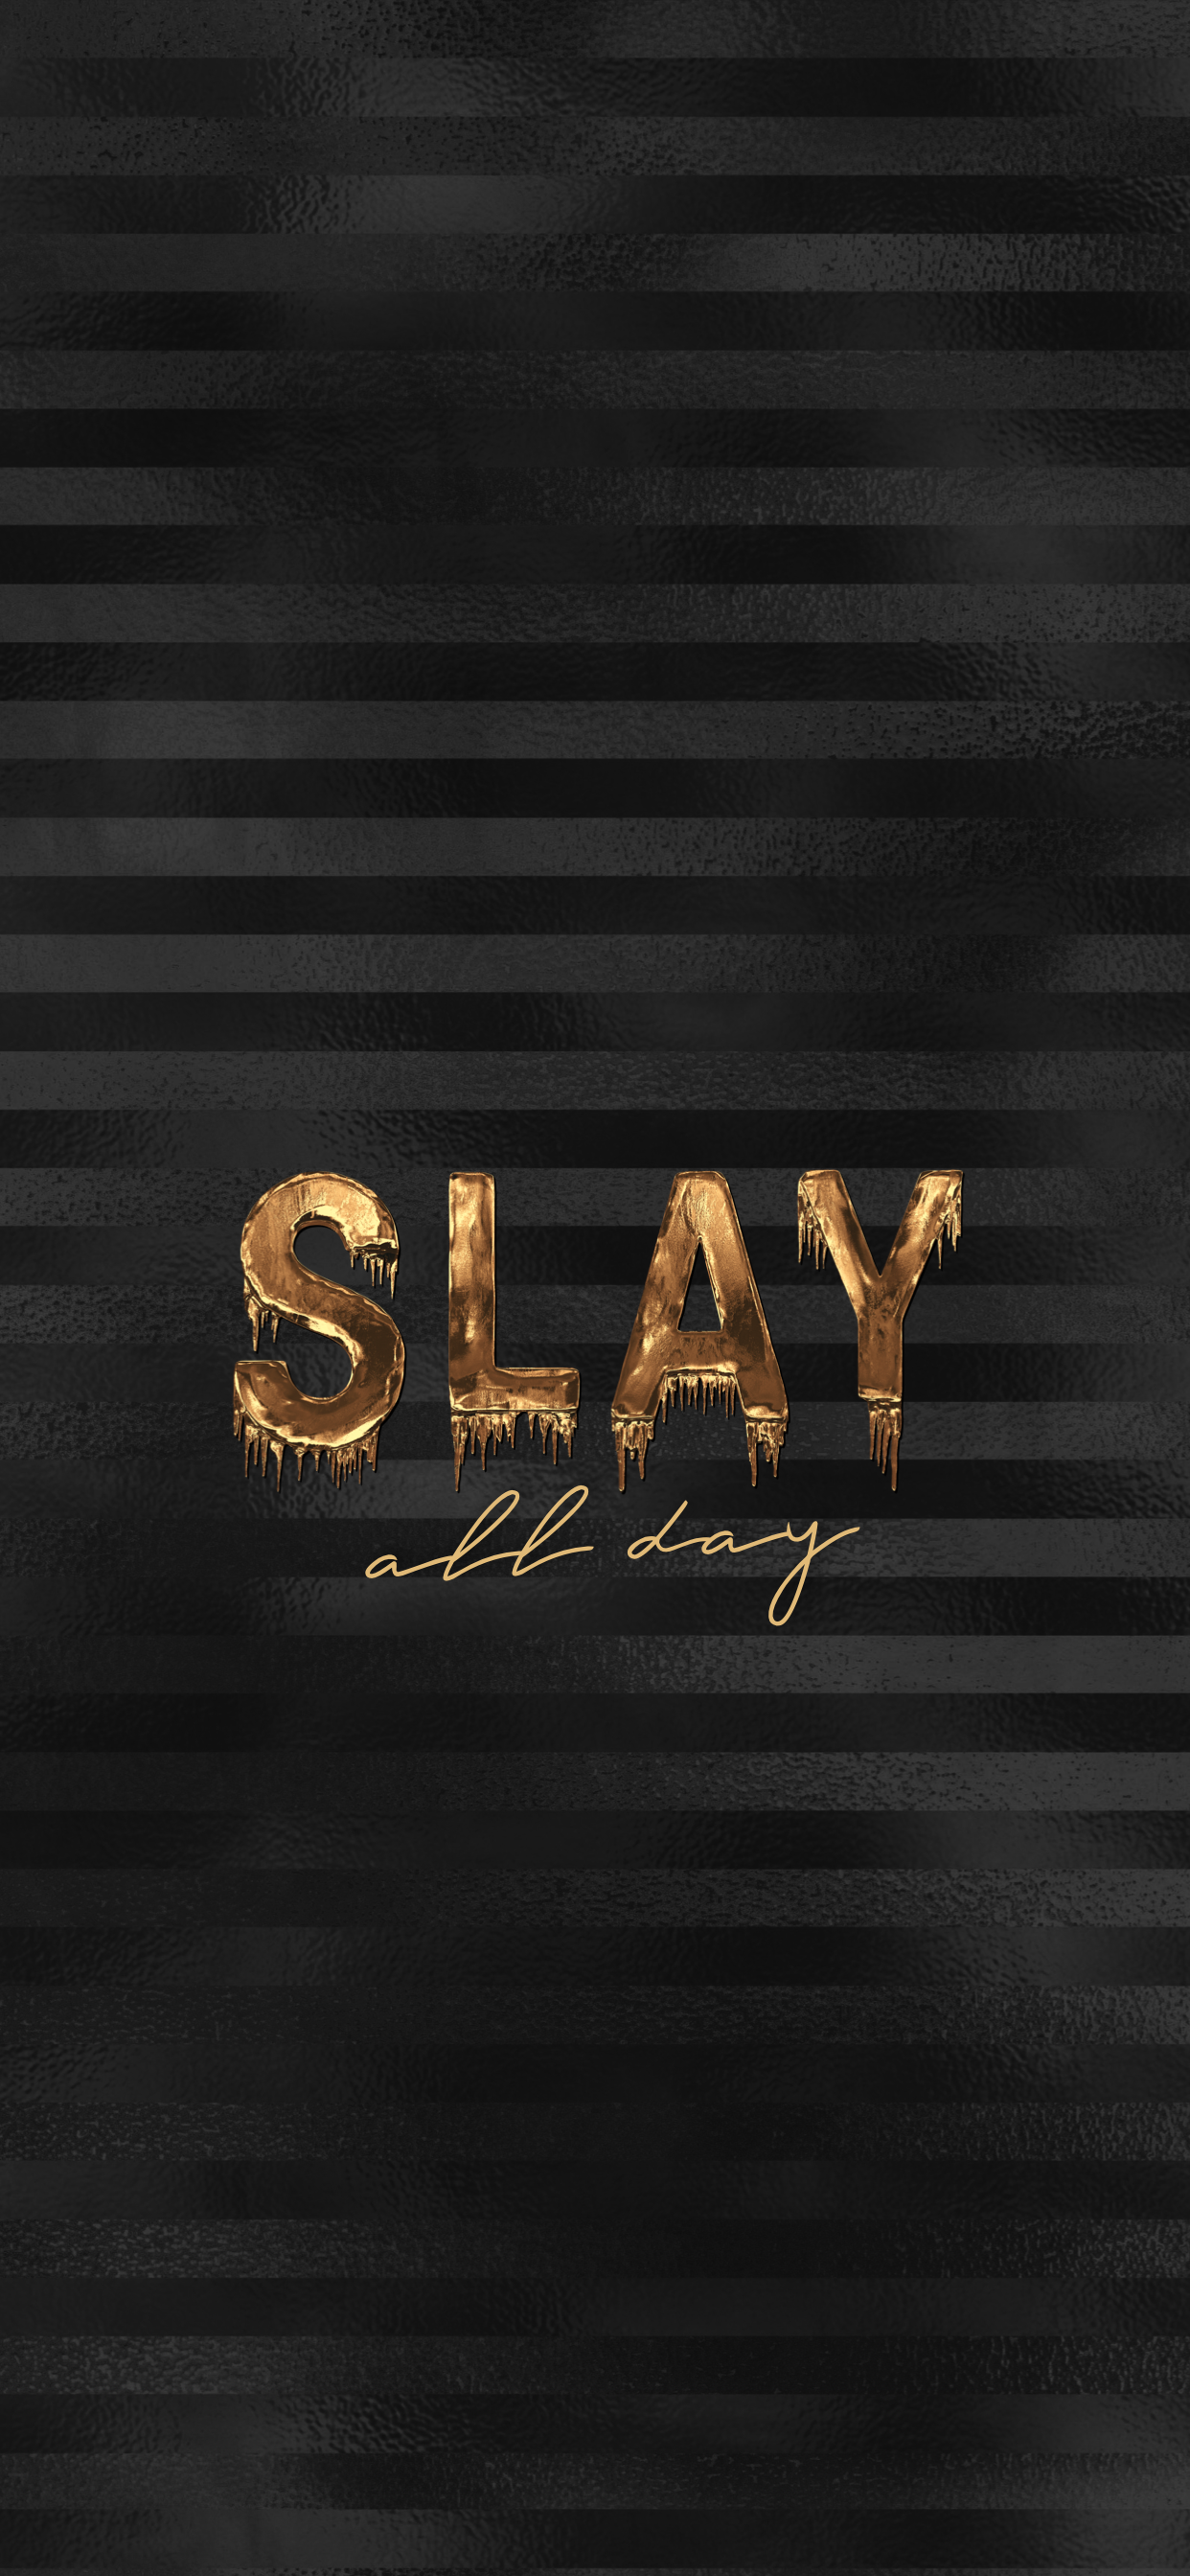 Slay All Day Wallpaper. Gold wallpaper iphone, Black and gold aesthetic, Gold wallpaper background